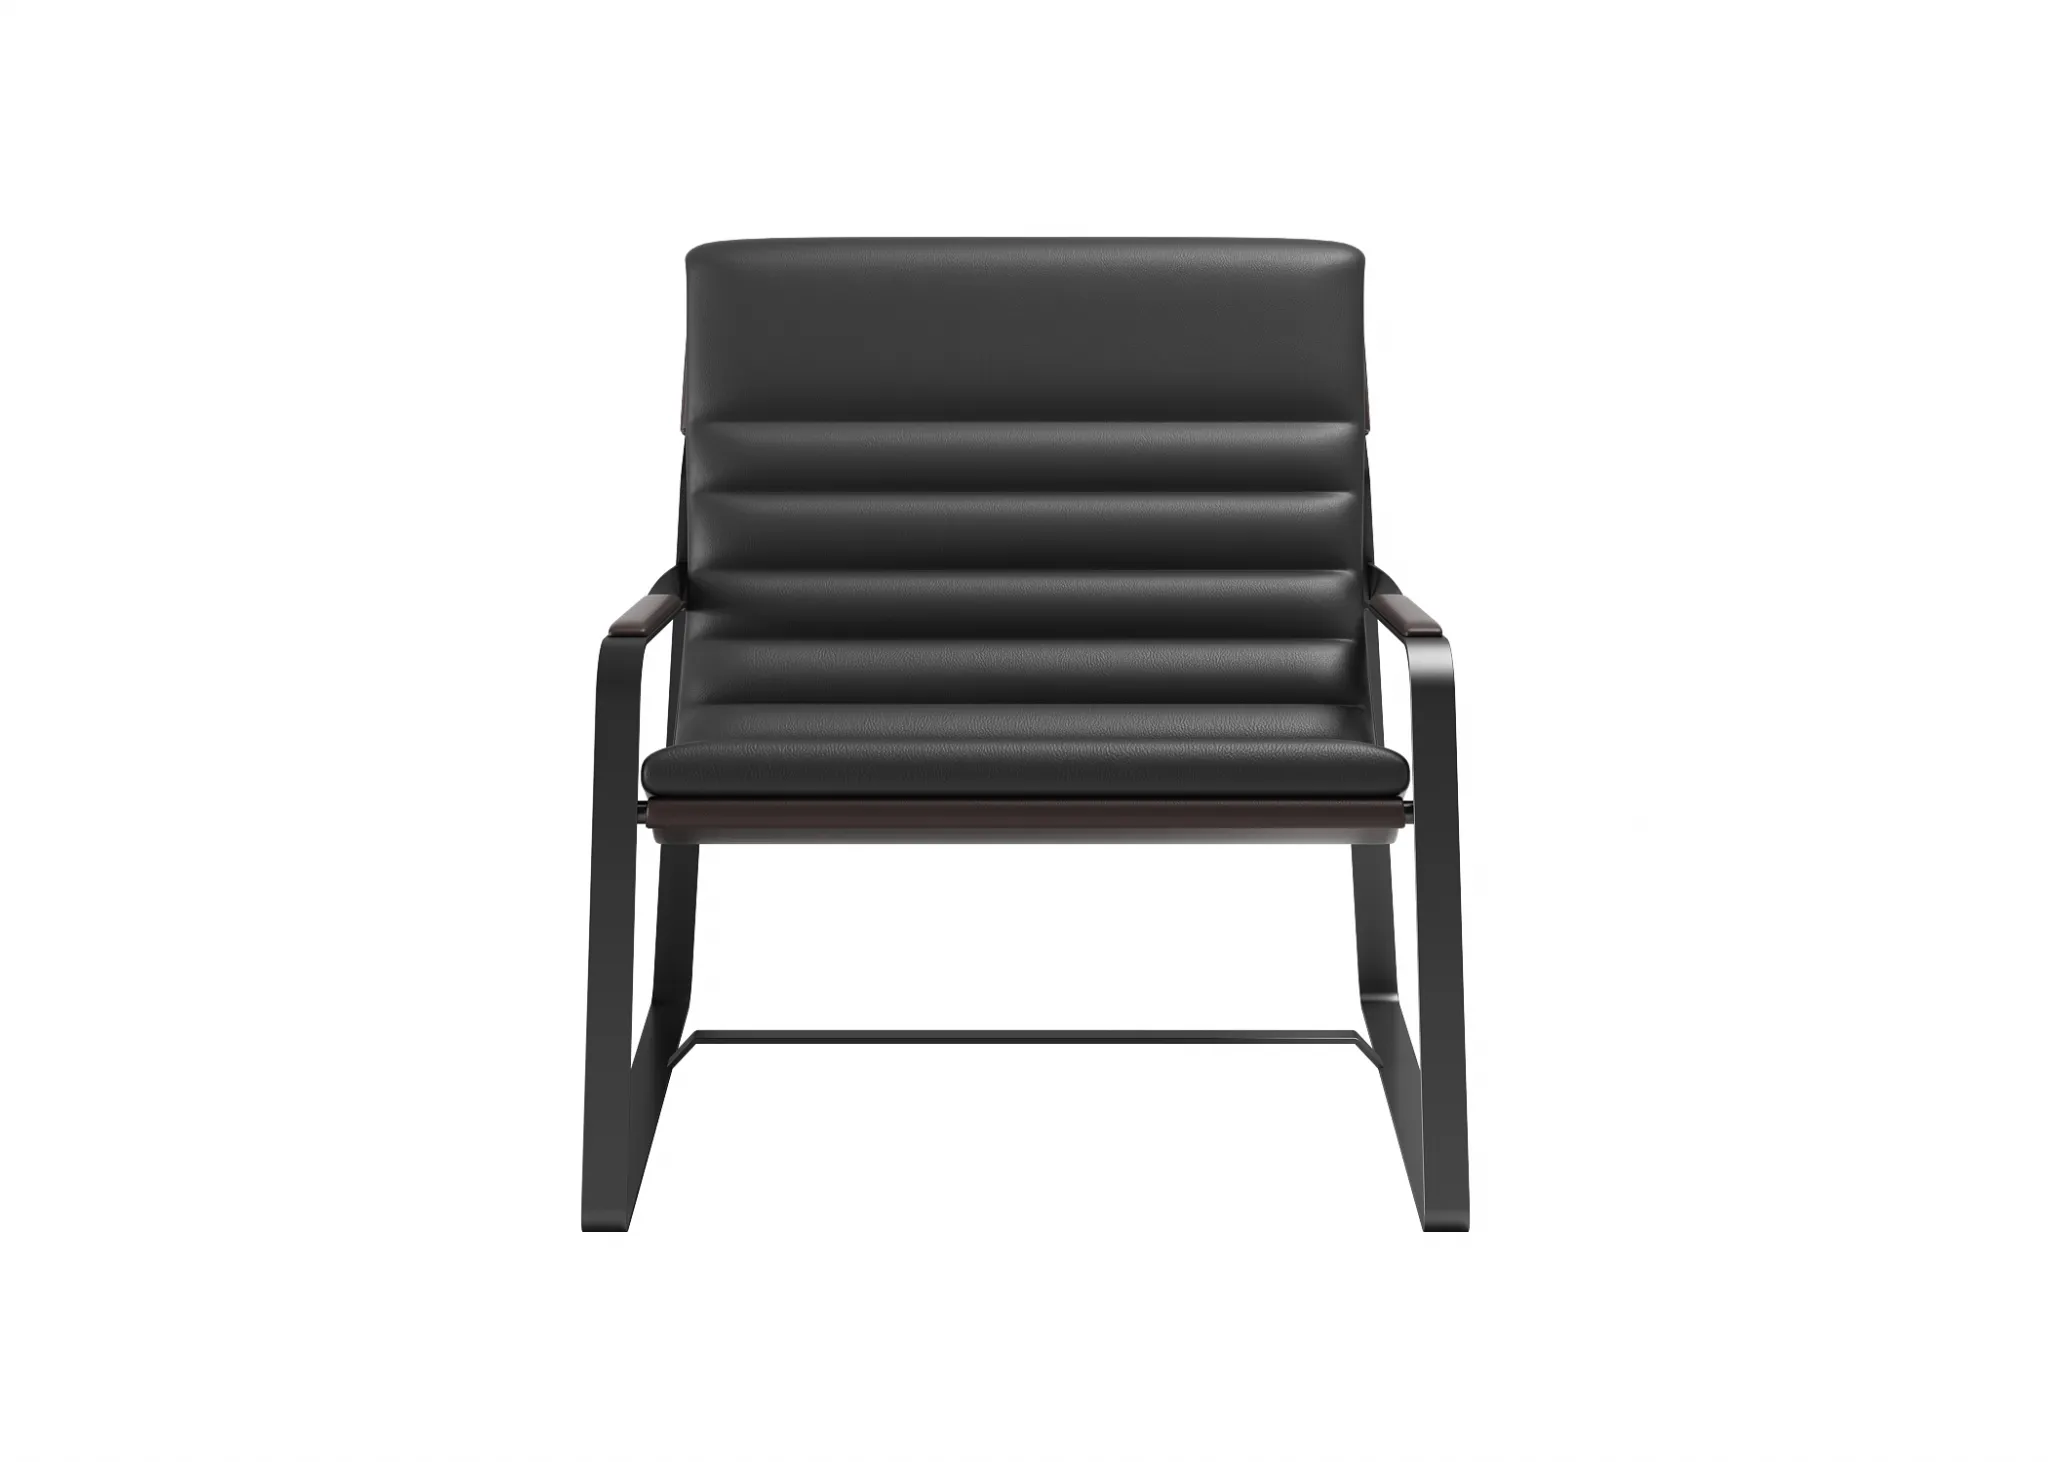 FURNITURE 3D MODELS – CHAIRS – 0302